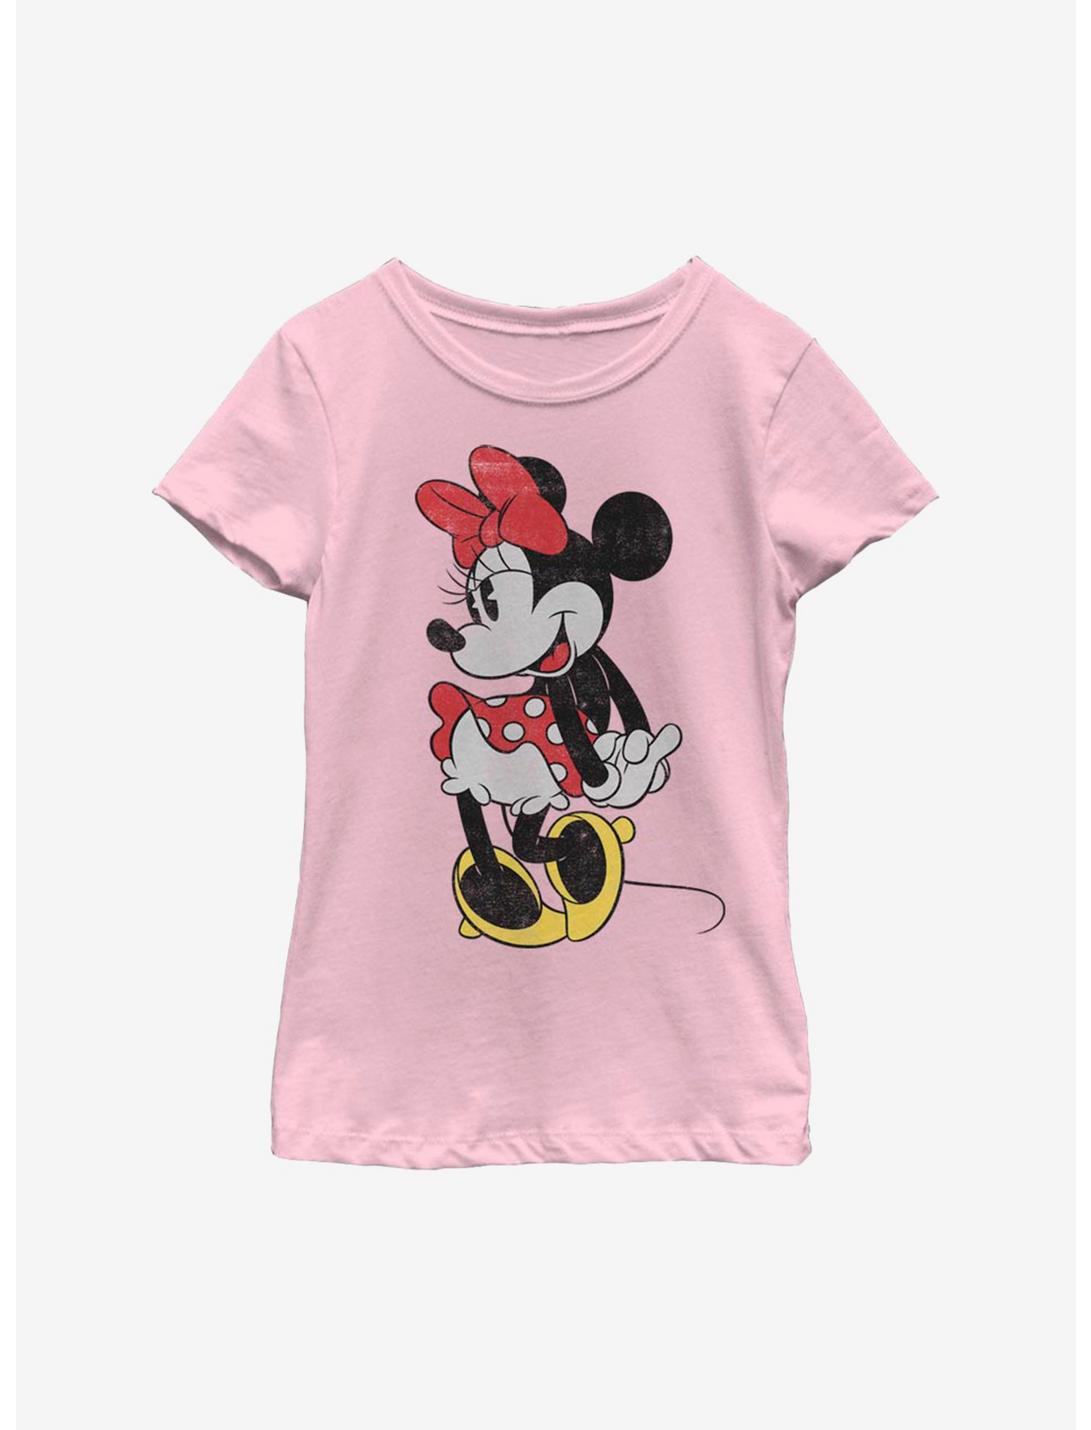 Disney Minnie Mouse Classic Minnie Youth Girls T-Shirt, PINK, hi-res